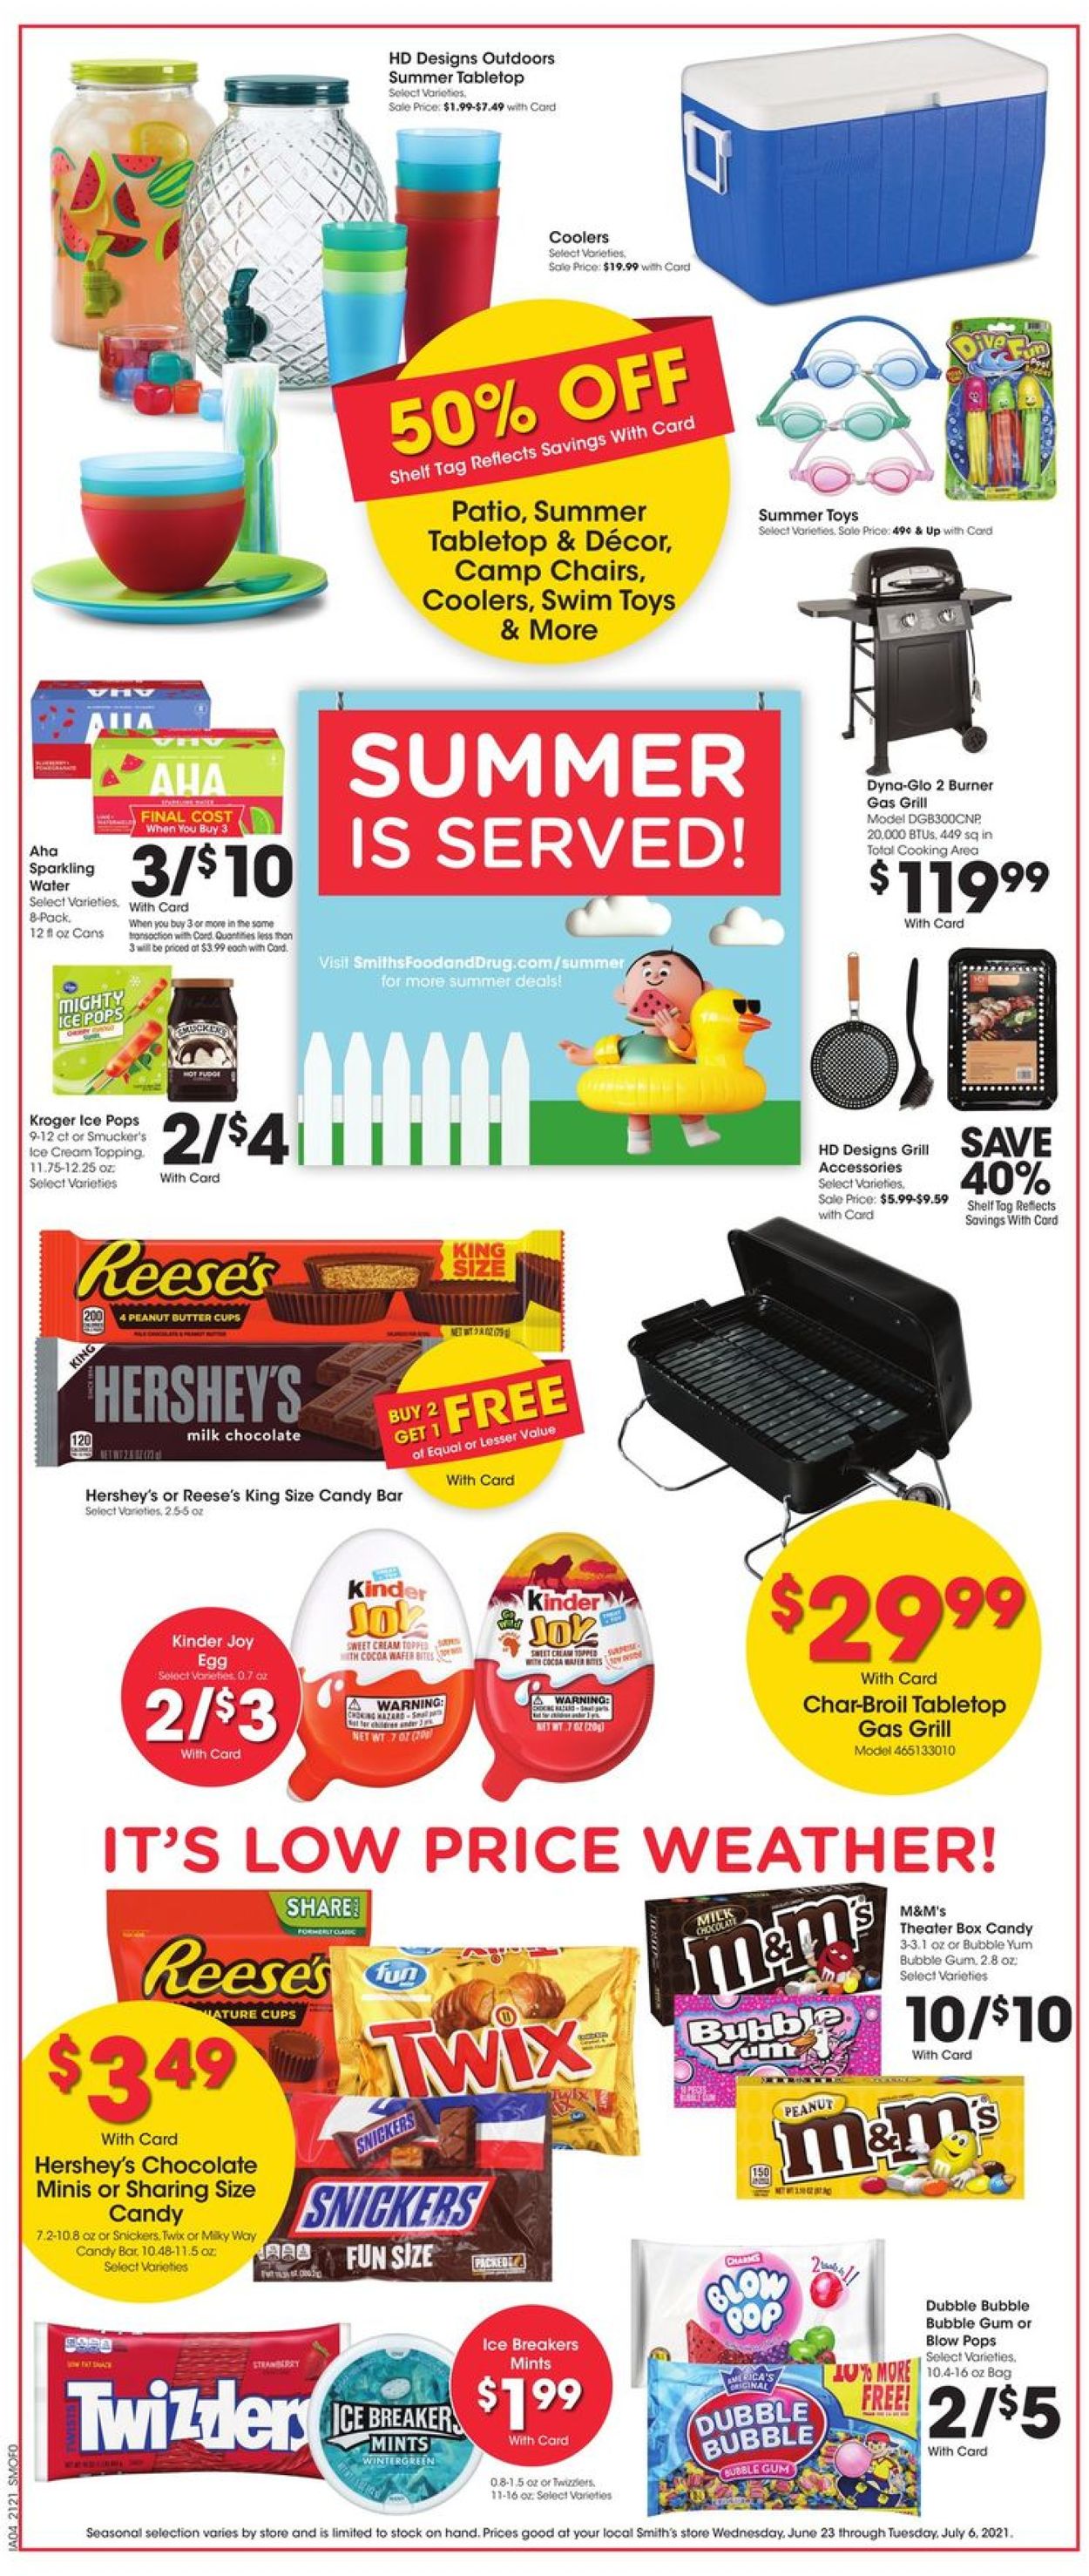 Smith's Ad from 06/23/2021